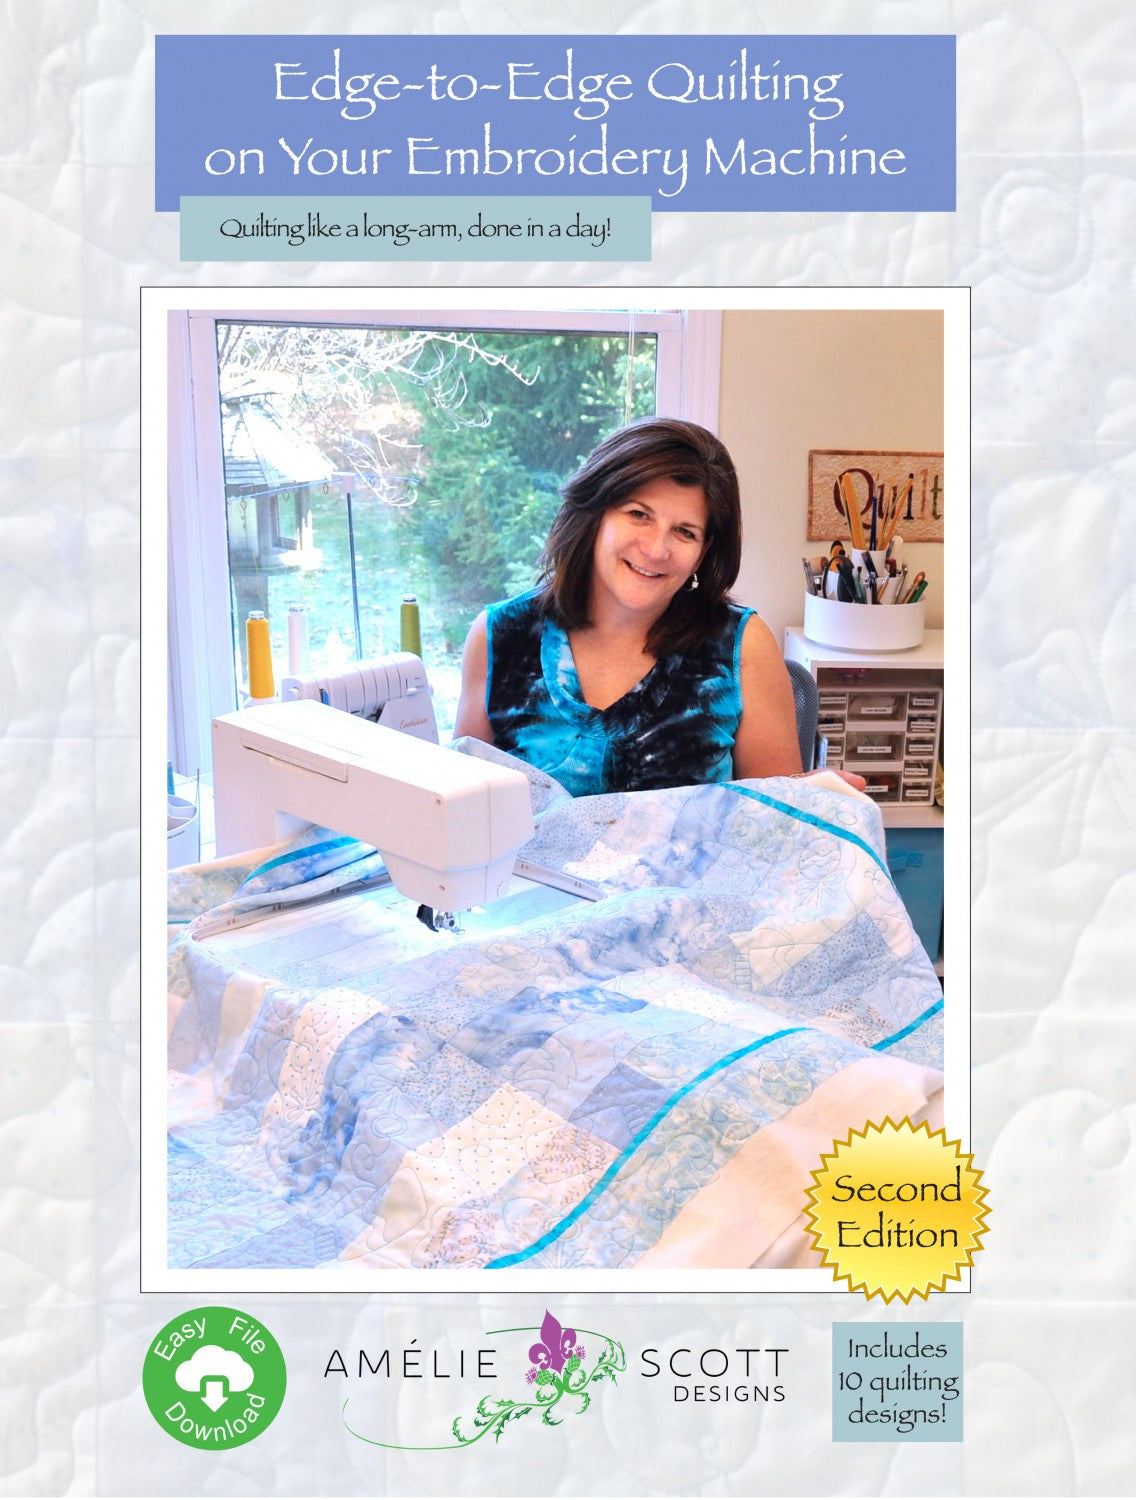 Edge-2-Edge Quilting on Your Embroidery Machine Guidebook